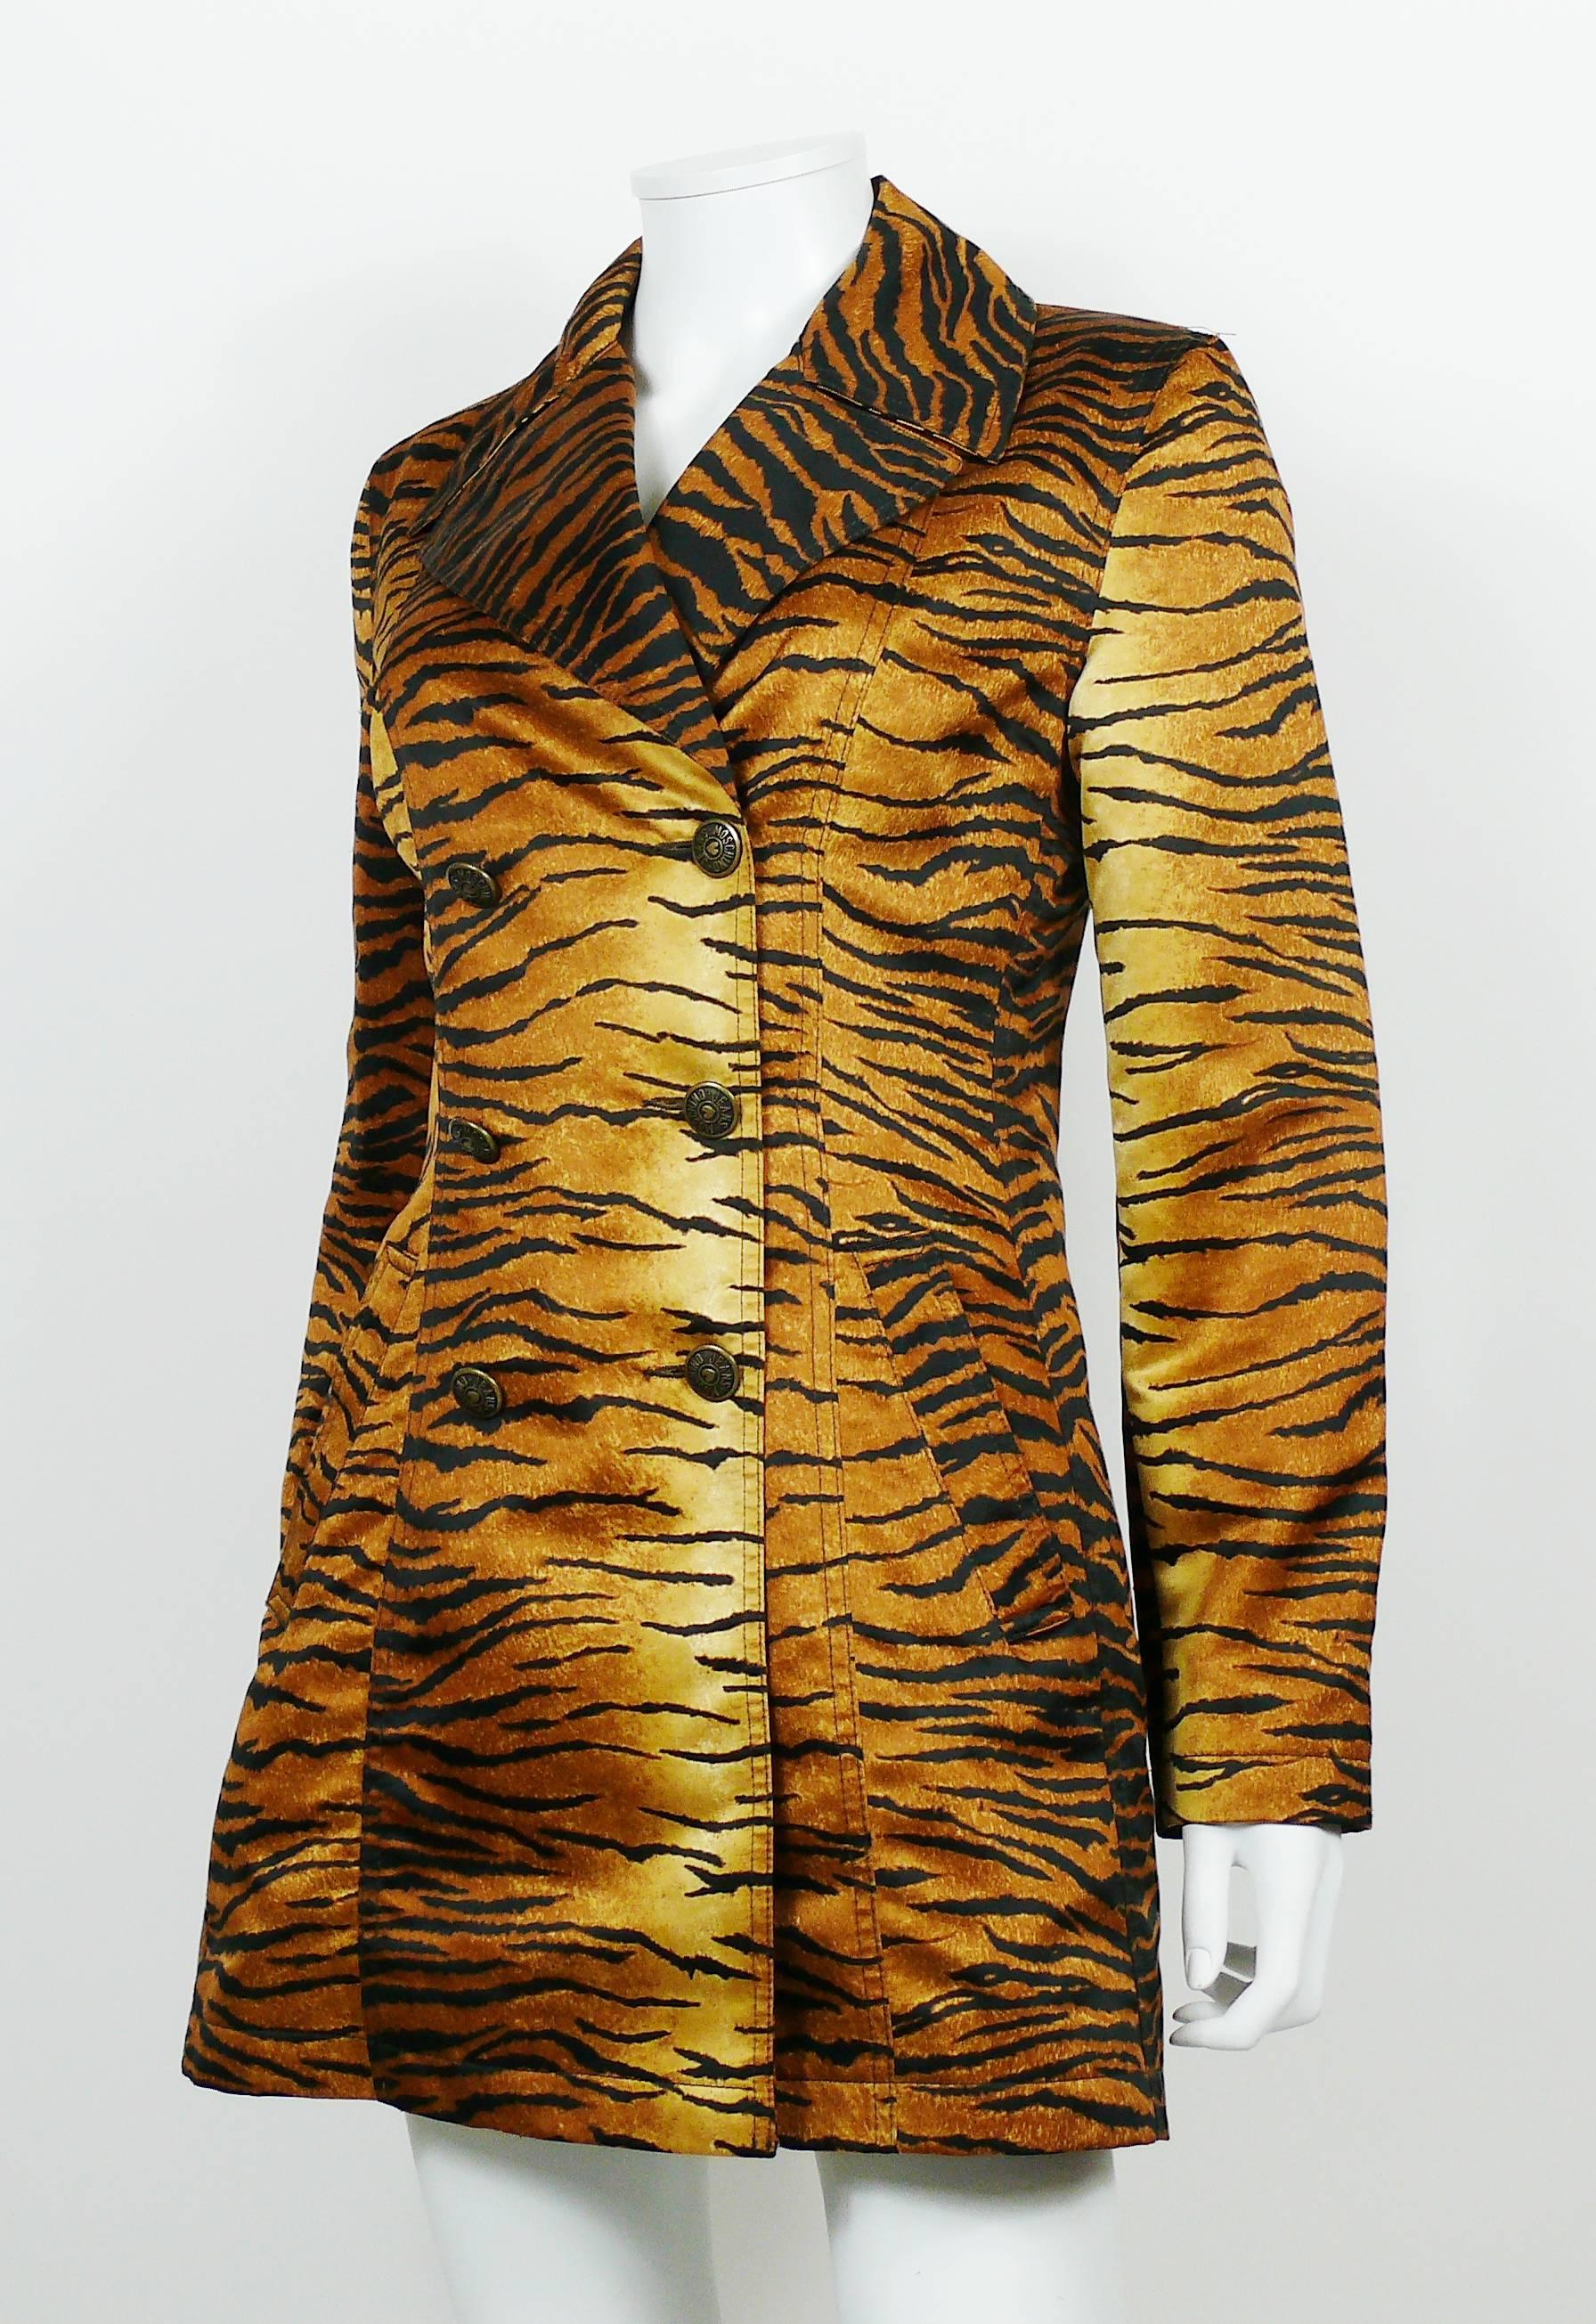 Women's Moschino Jeans Vintage Tiger Print Double Breasted Long Jacket US Size 8